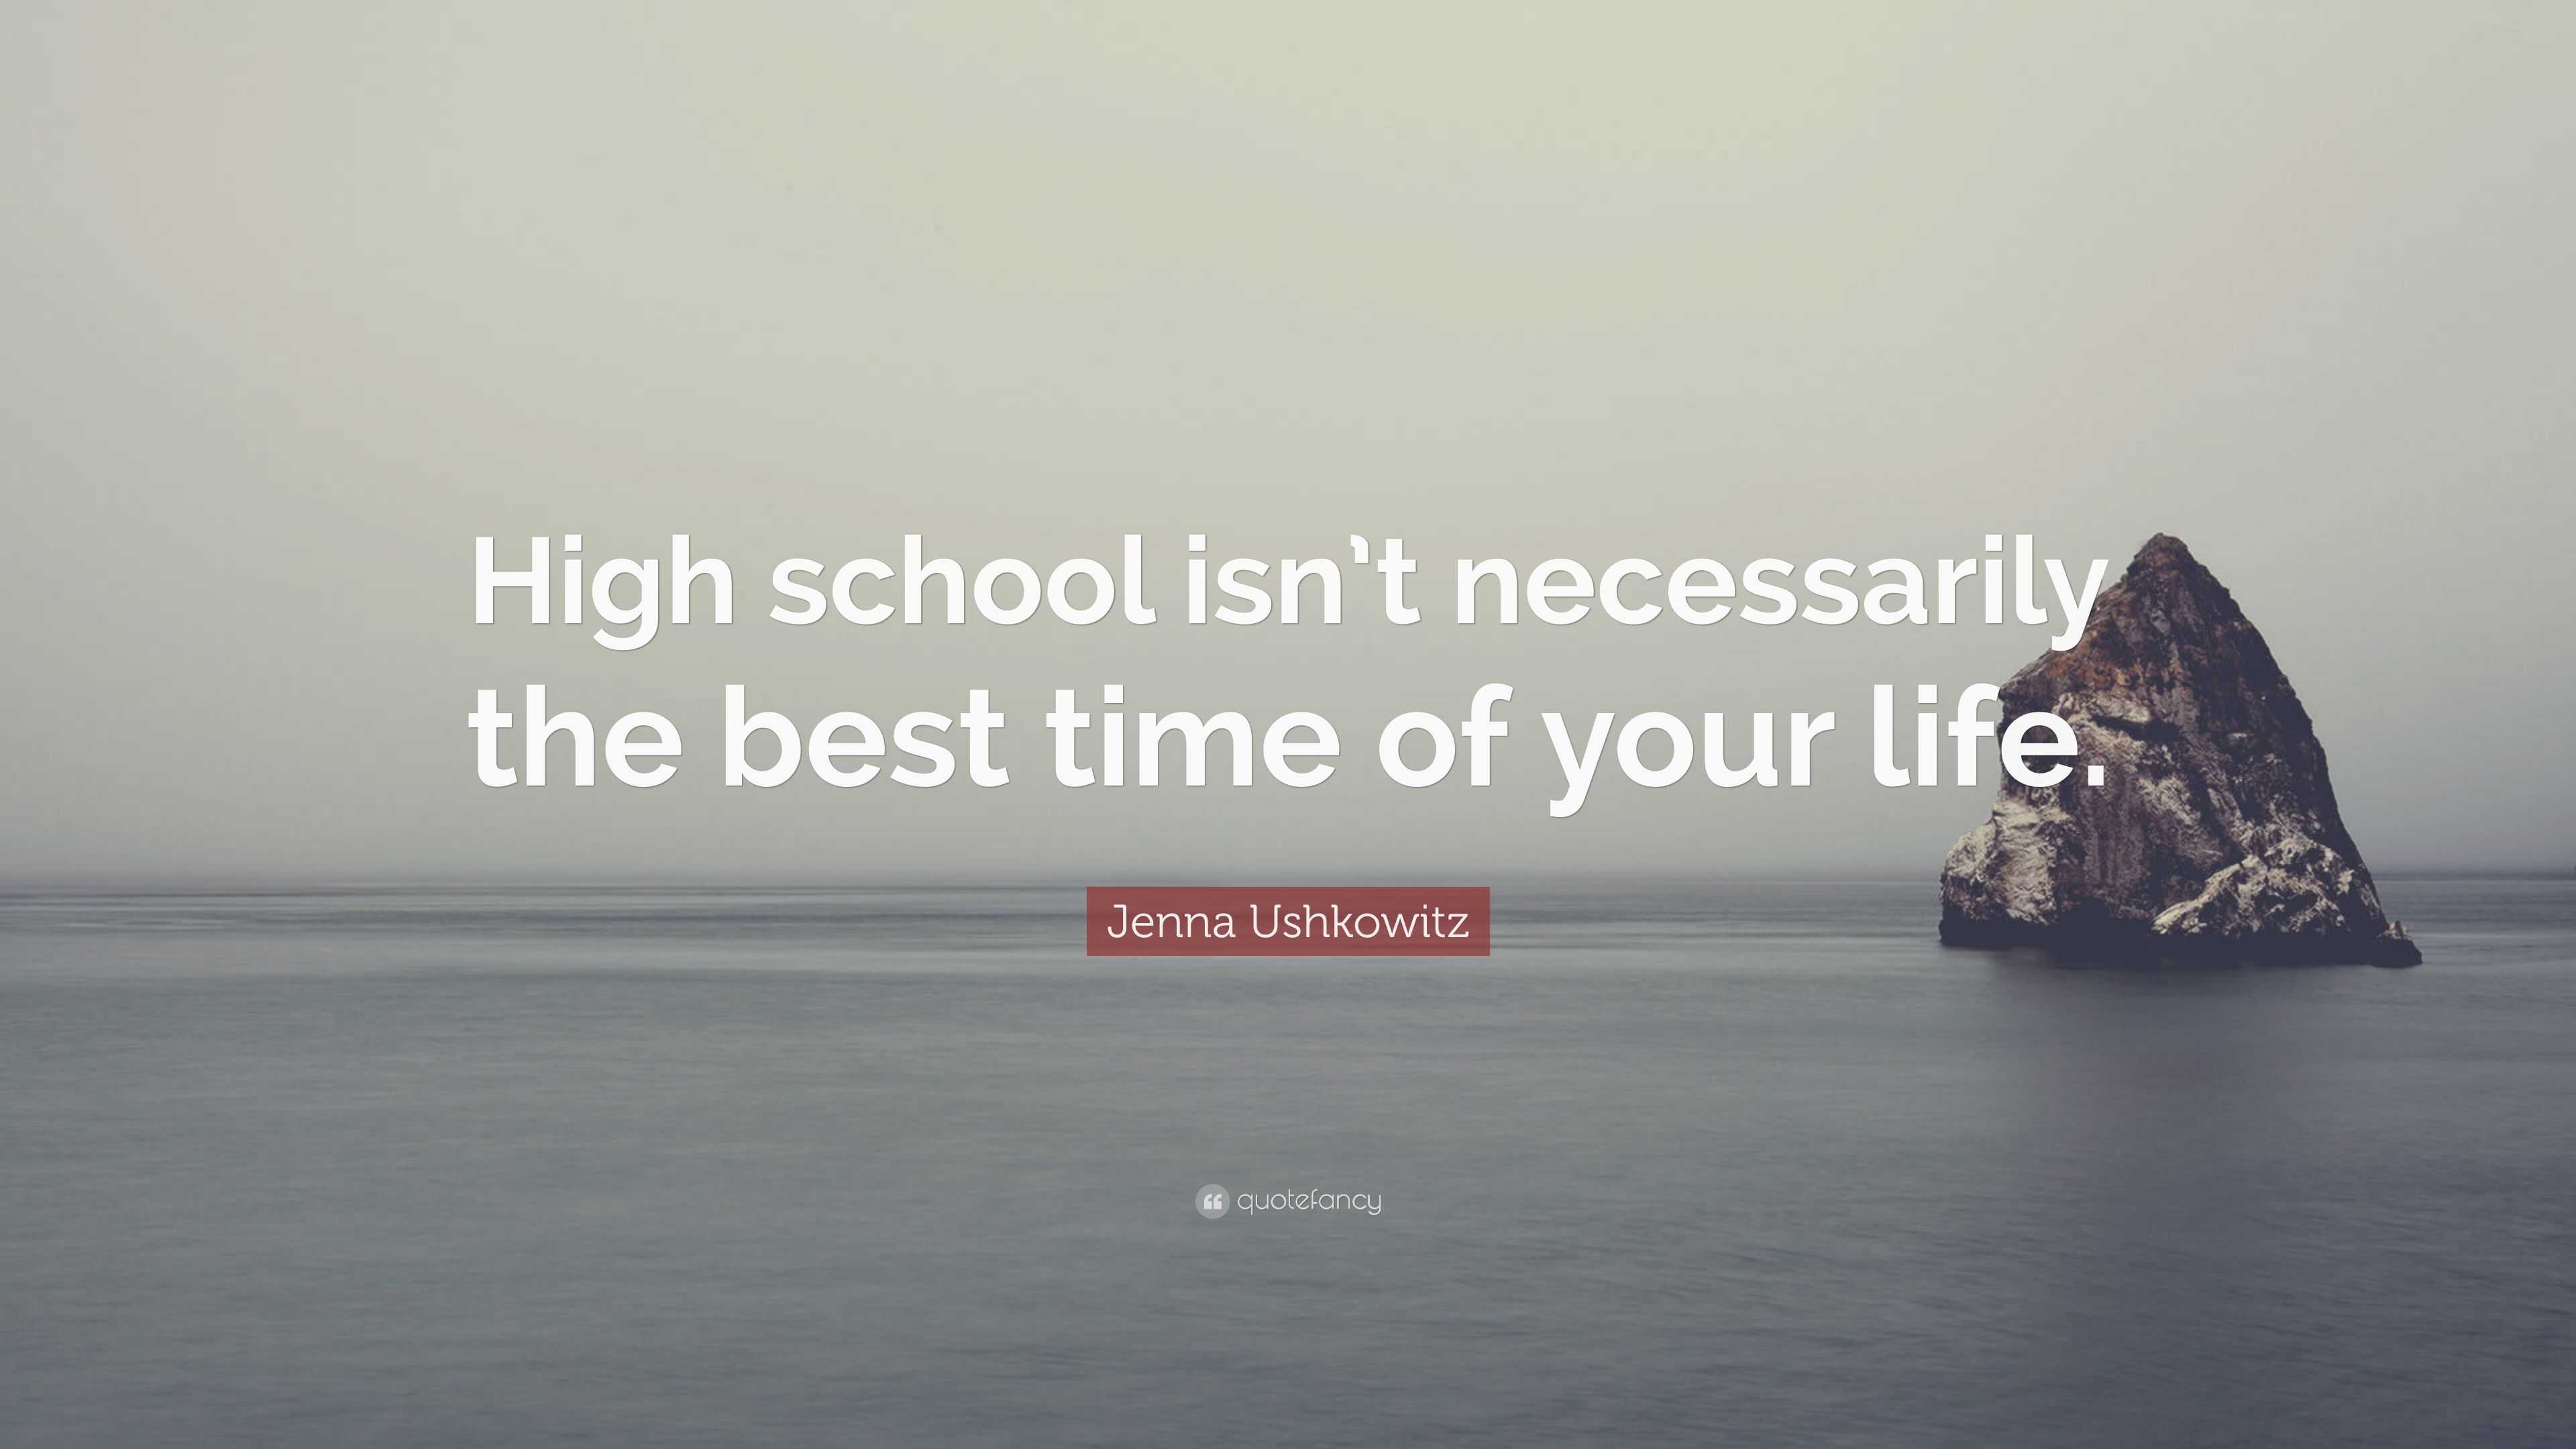 Jenna Ushkowitz Quote “High school isn t necessarily the best time of your